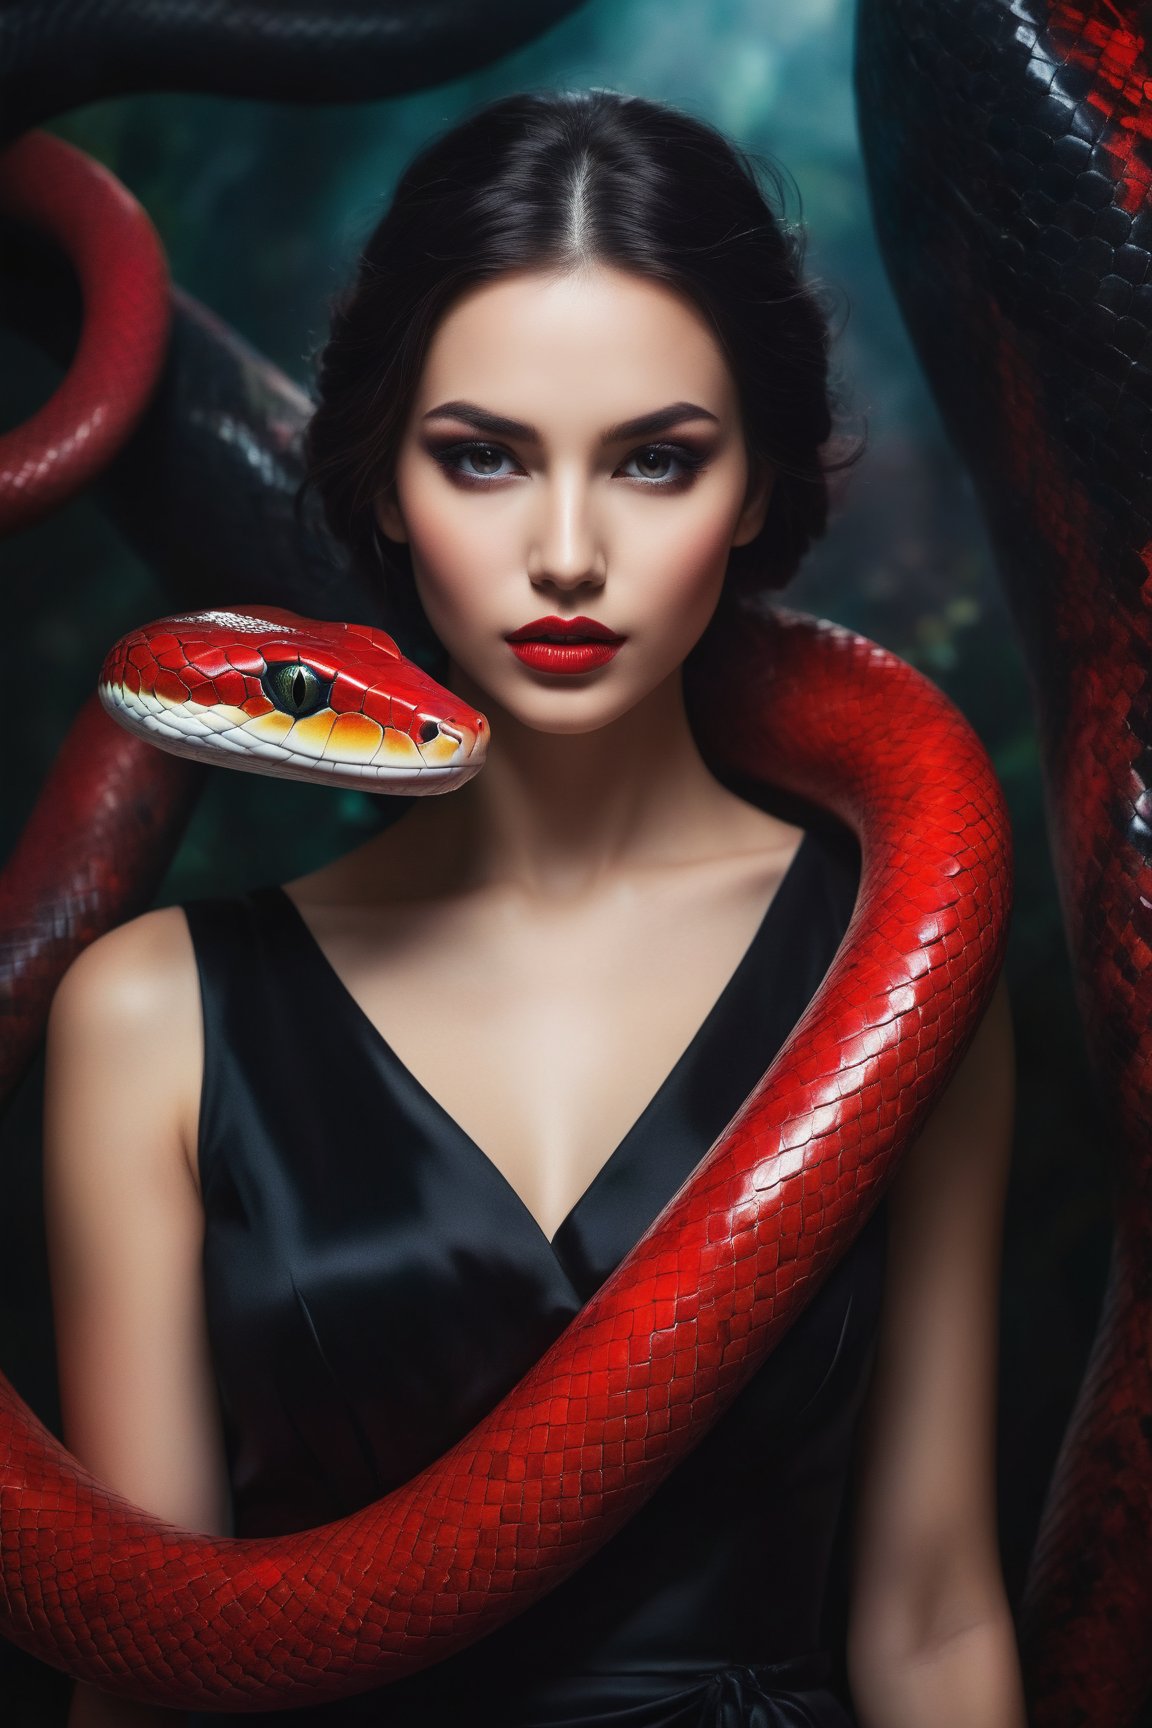 Soft-focused lighting casts an eerie glow on a young woman's enigmatic expression as she cradles a gargantuan red snake in her arms. Her body is encased in a flowing black dress, its silhouette eerily contrasted against the vibrant reptile. A bold stroke of lipstick adds a pop of color to her otherwise stoic features. The subject stands uniformly in a dimly lit, high-contrast environment, inviting the viewer into an unsettling yet alluring world where the boundaries between reality and fantasy blur.